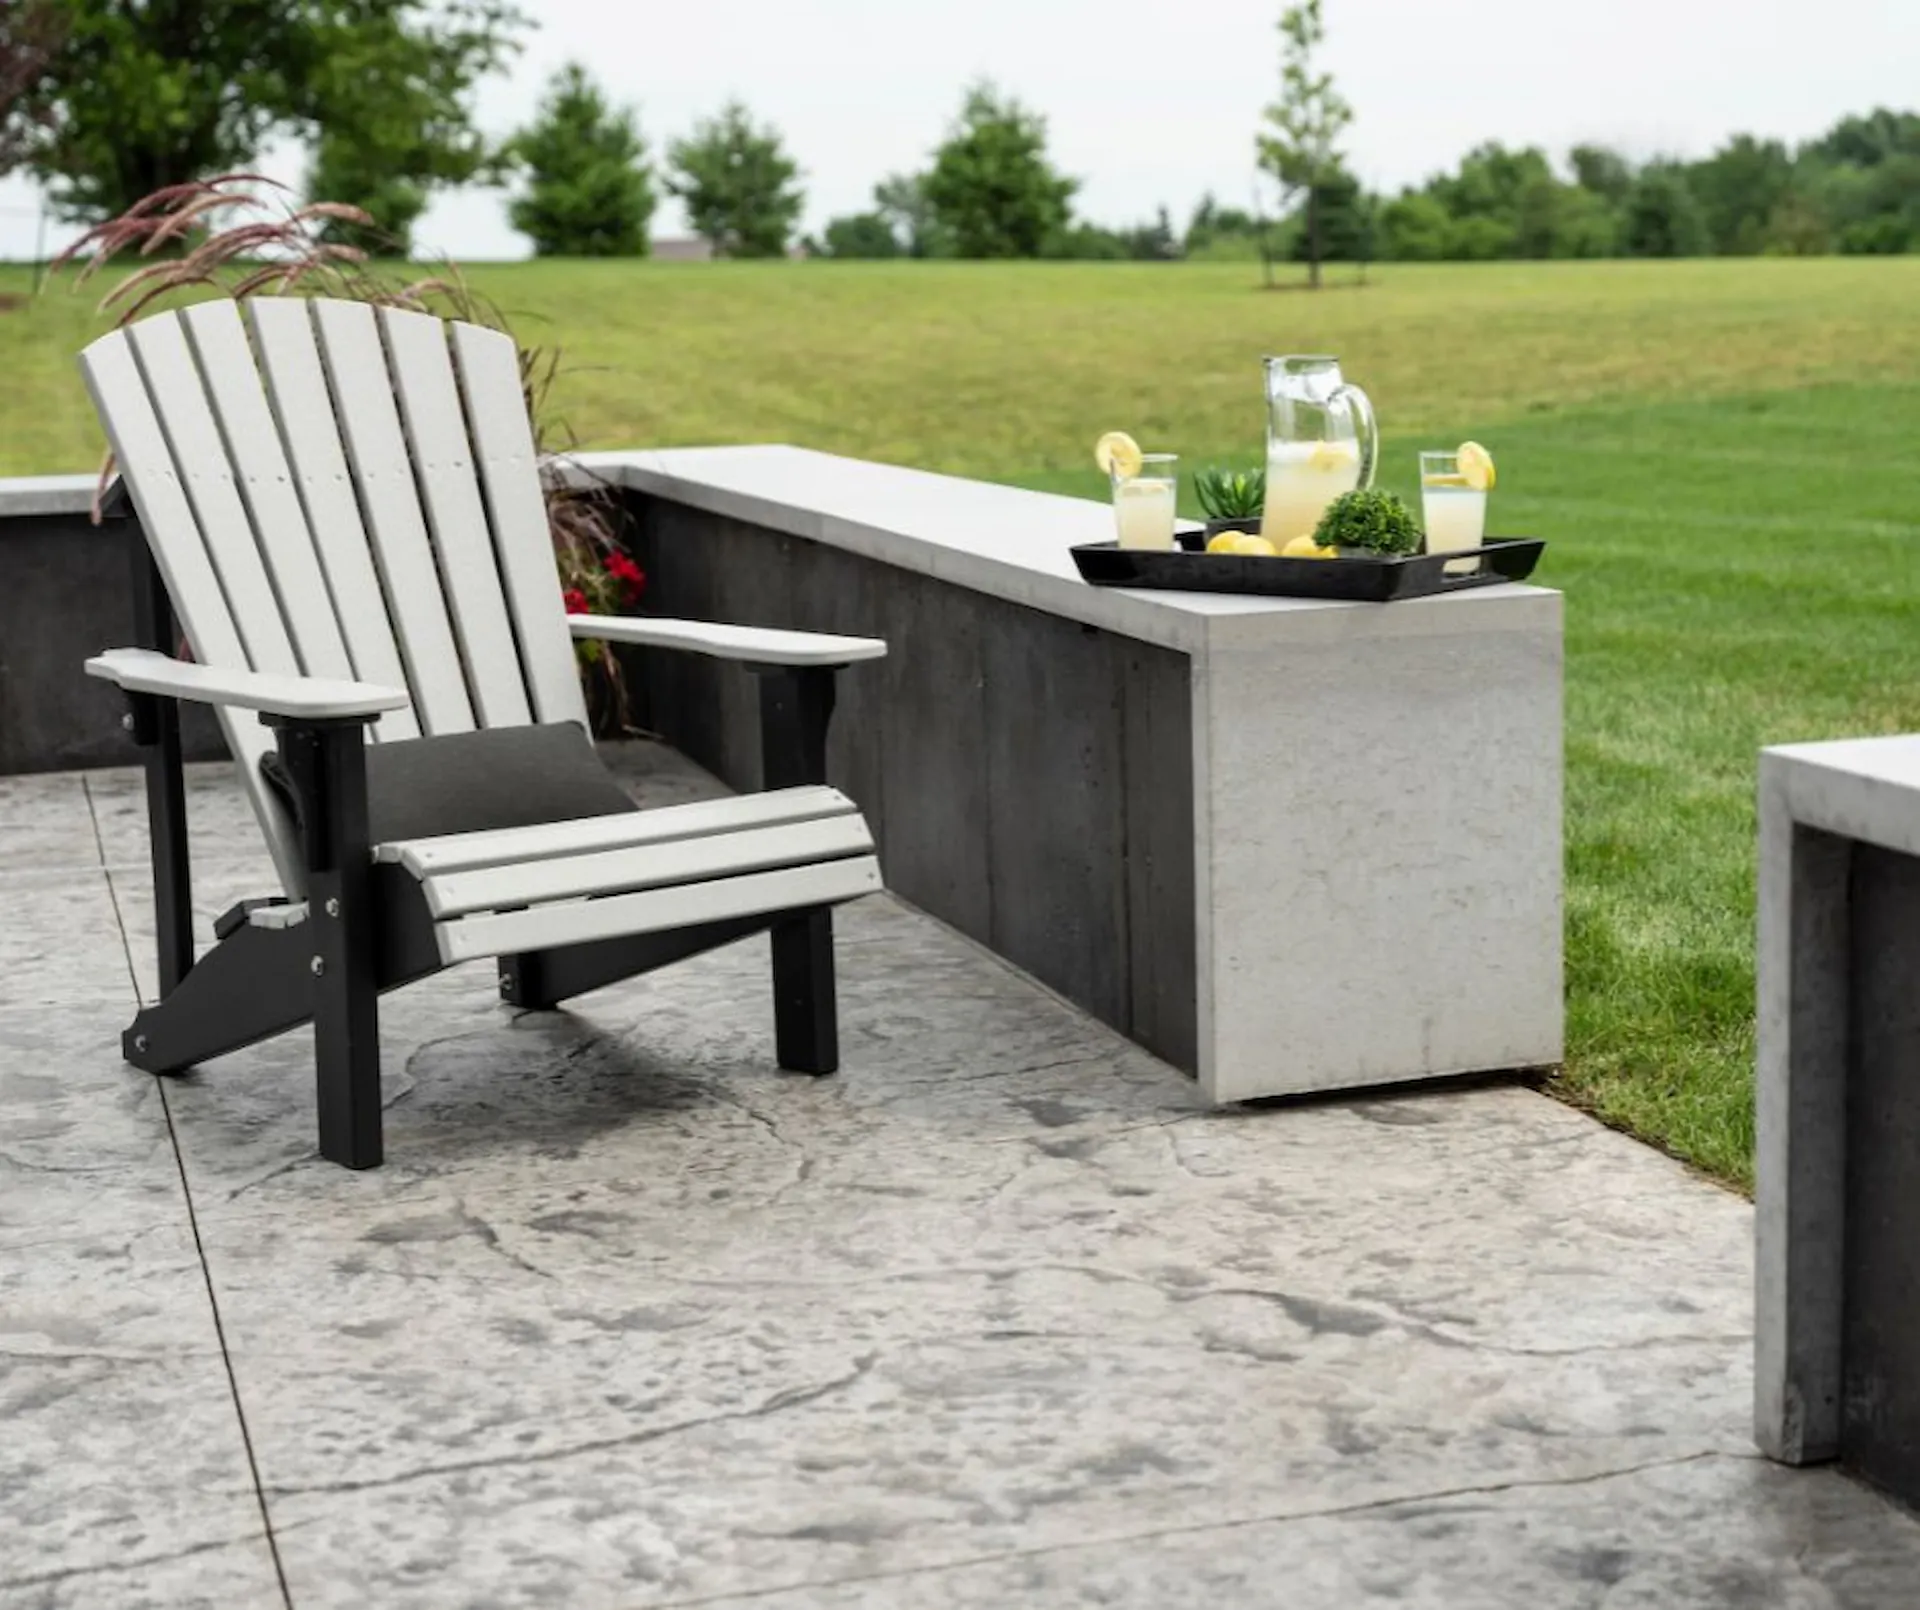 Medium shot of a grey, wooden lawn chair set on a stamped concrete patio. A slate texture pattern is one of the most popular stamped concrete applications for patios.